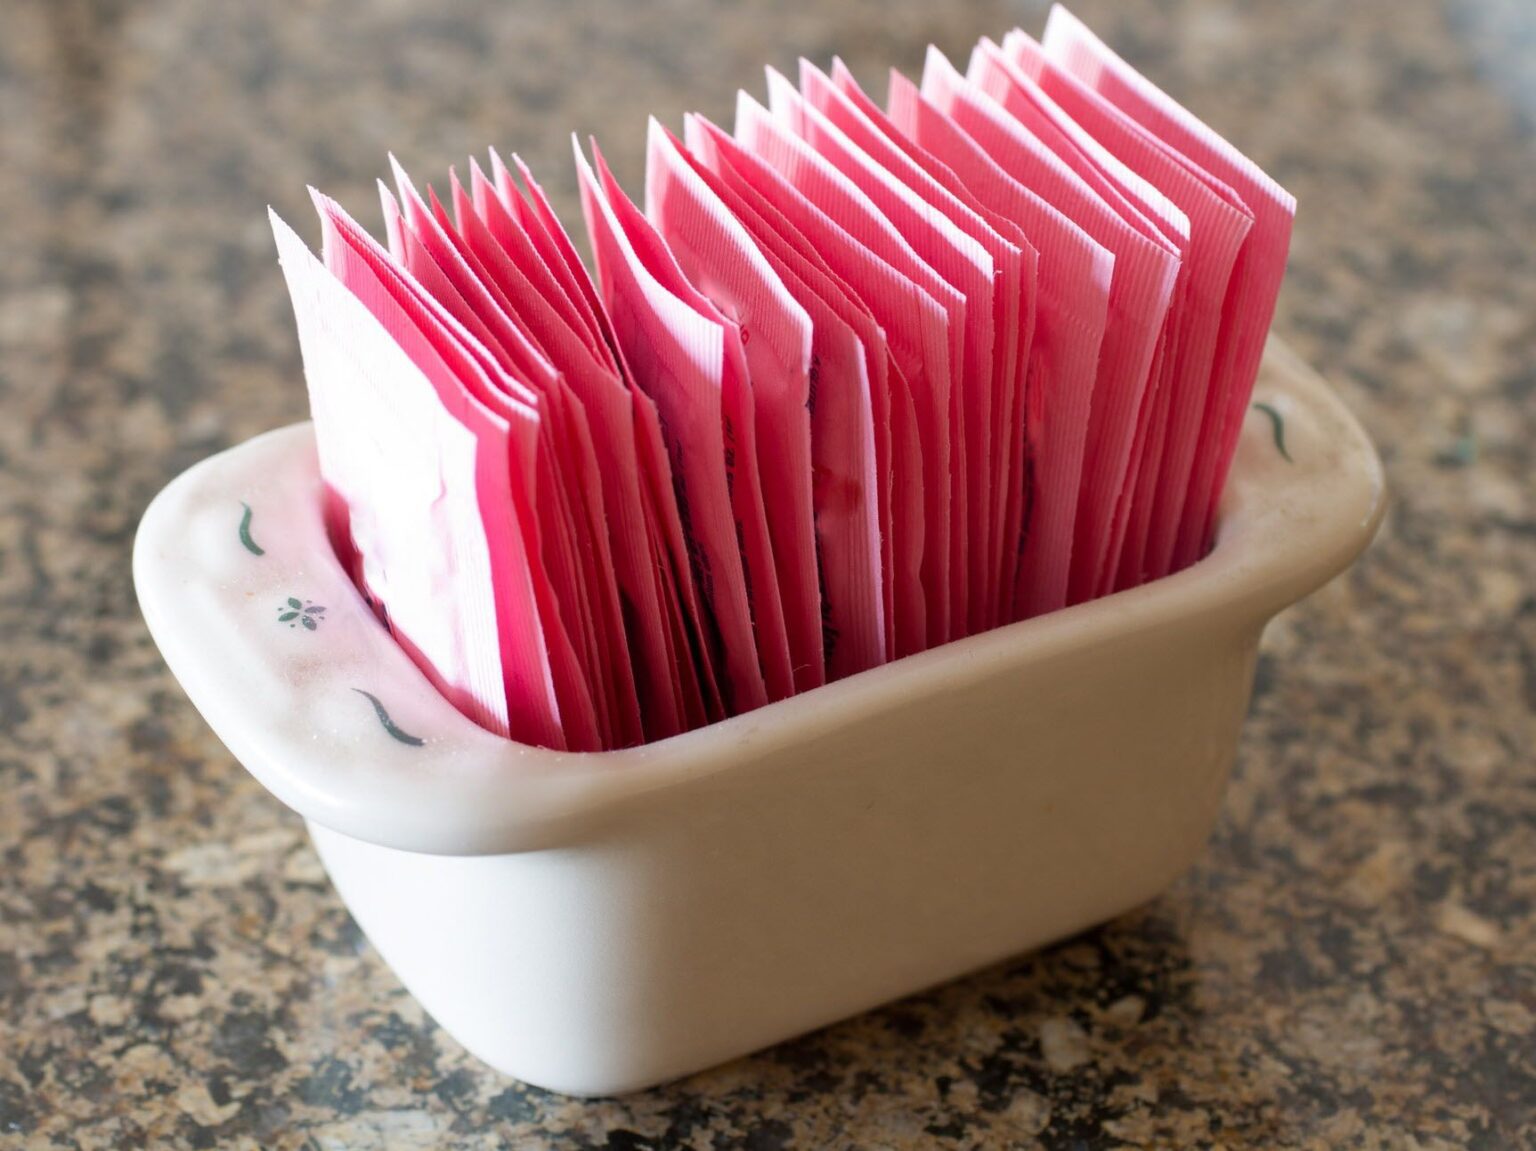 Why Artificial Sweeteners Can Actually Be Bad